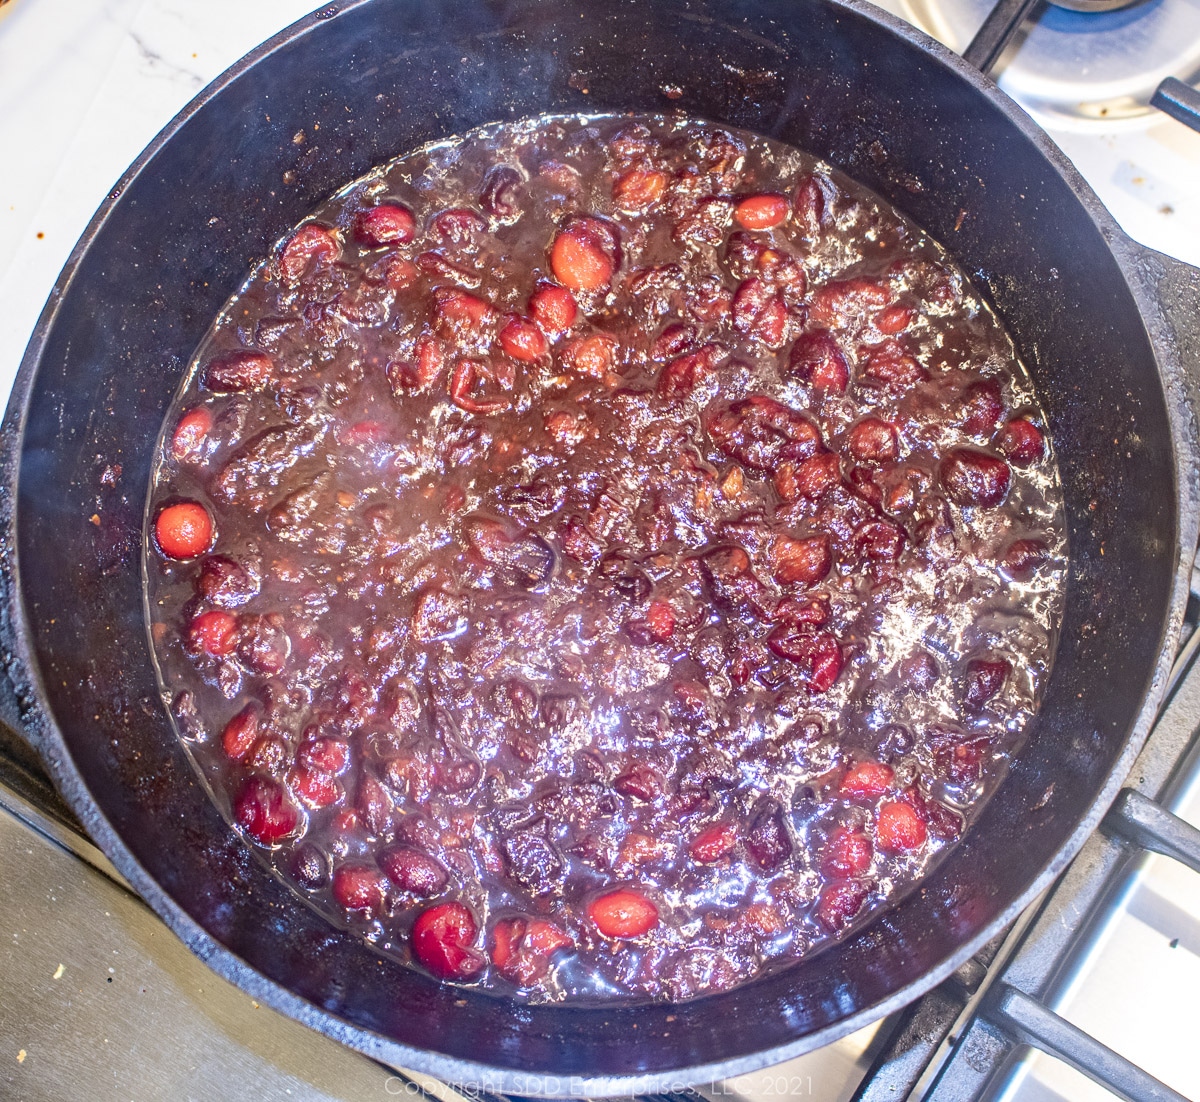 simmering whole cranberries break dow in spices in a Dutch oven